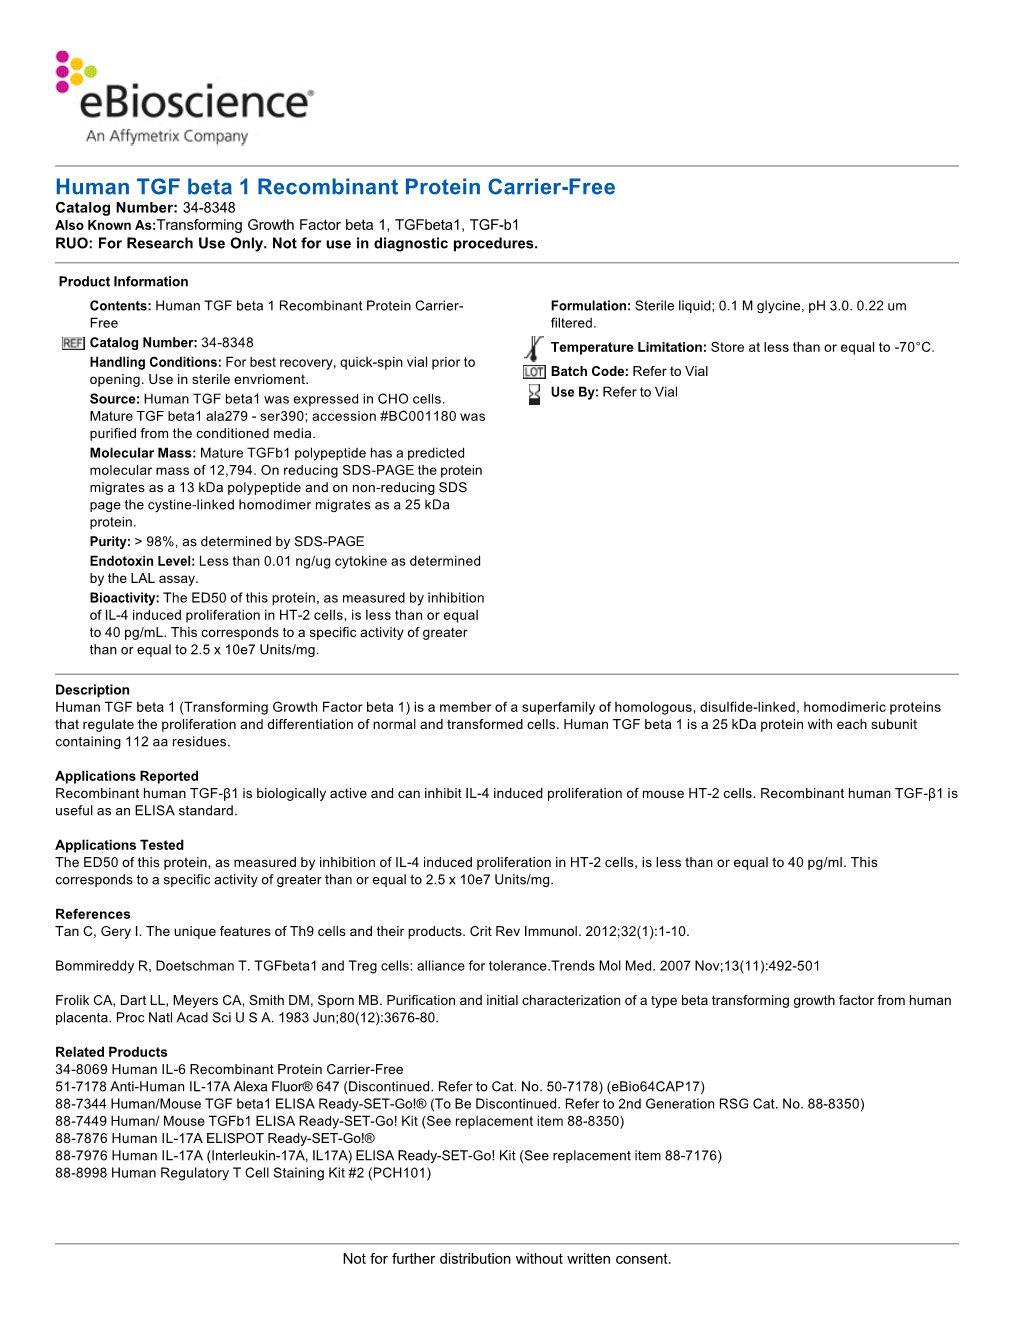 Human TGF Beta 1 Recombinant Protein Carrier-Free Catalog Number: 34-8348 Also Known As:Transforming Growth Factor Beta 1, Tgfbeta1, TGF-B1 RUO: for Research Use Only